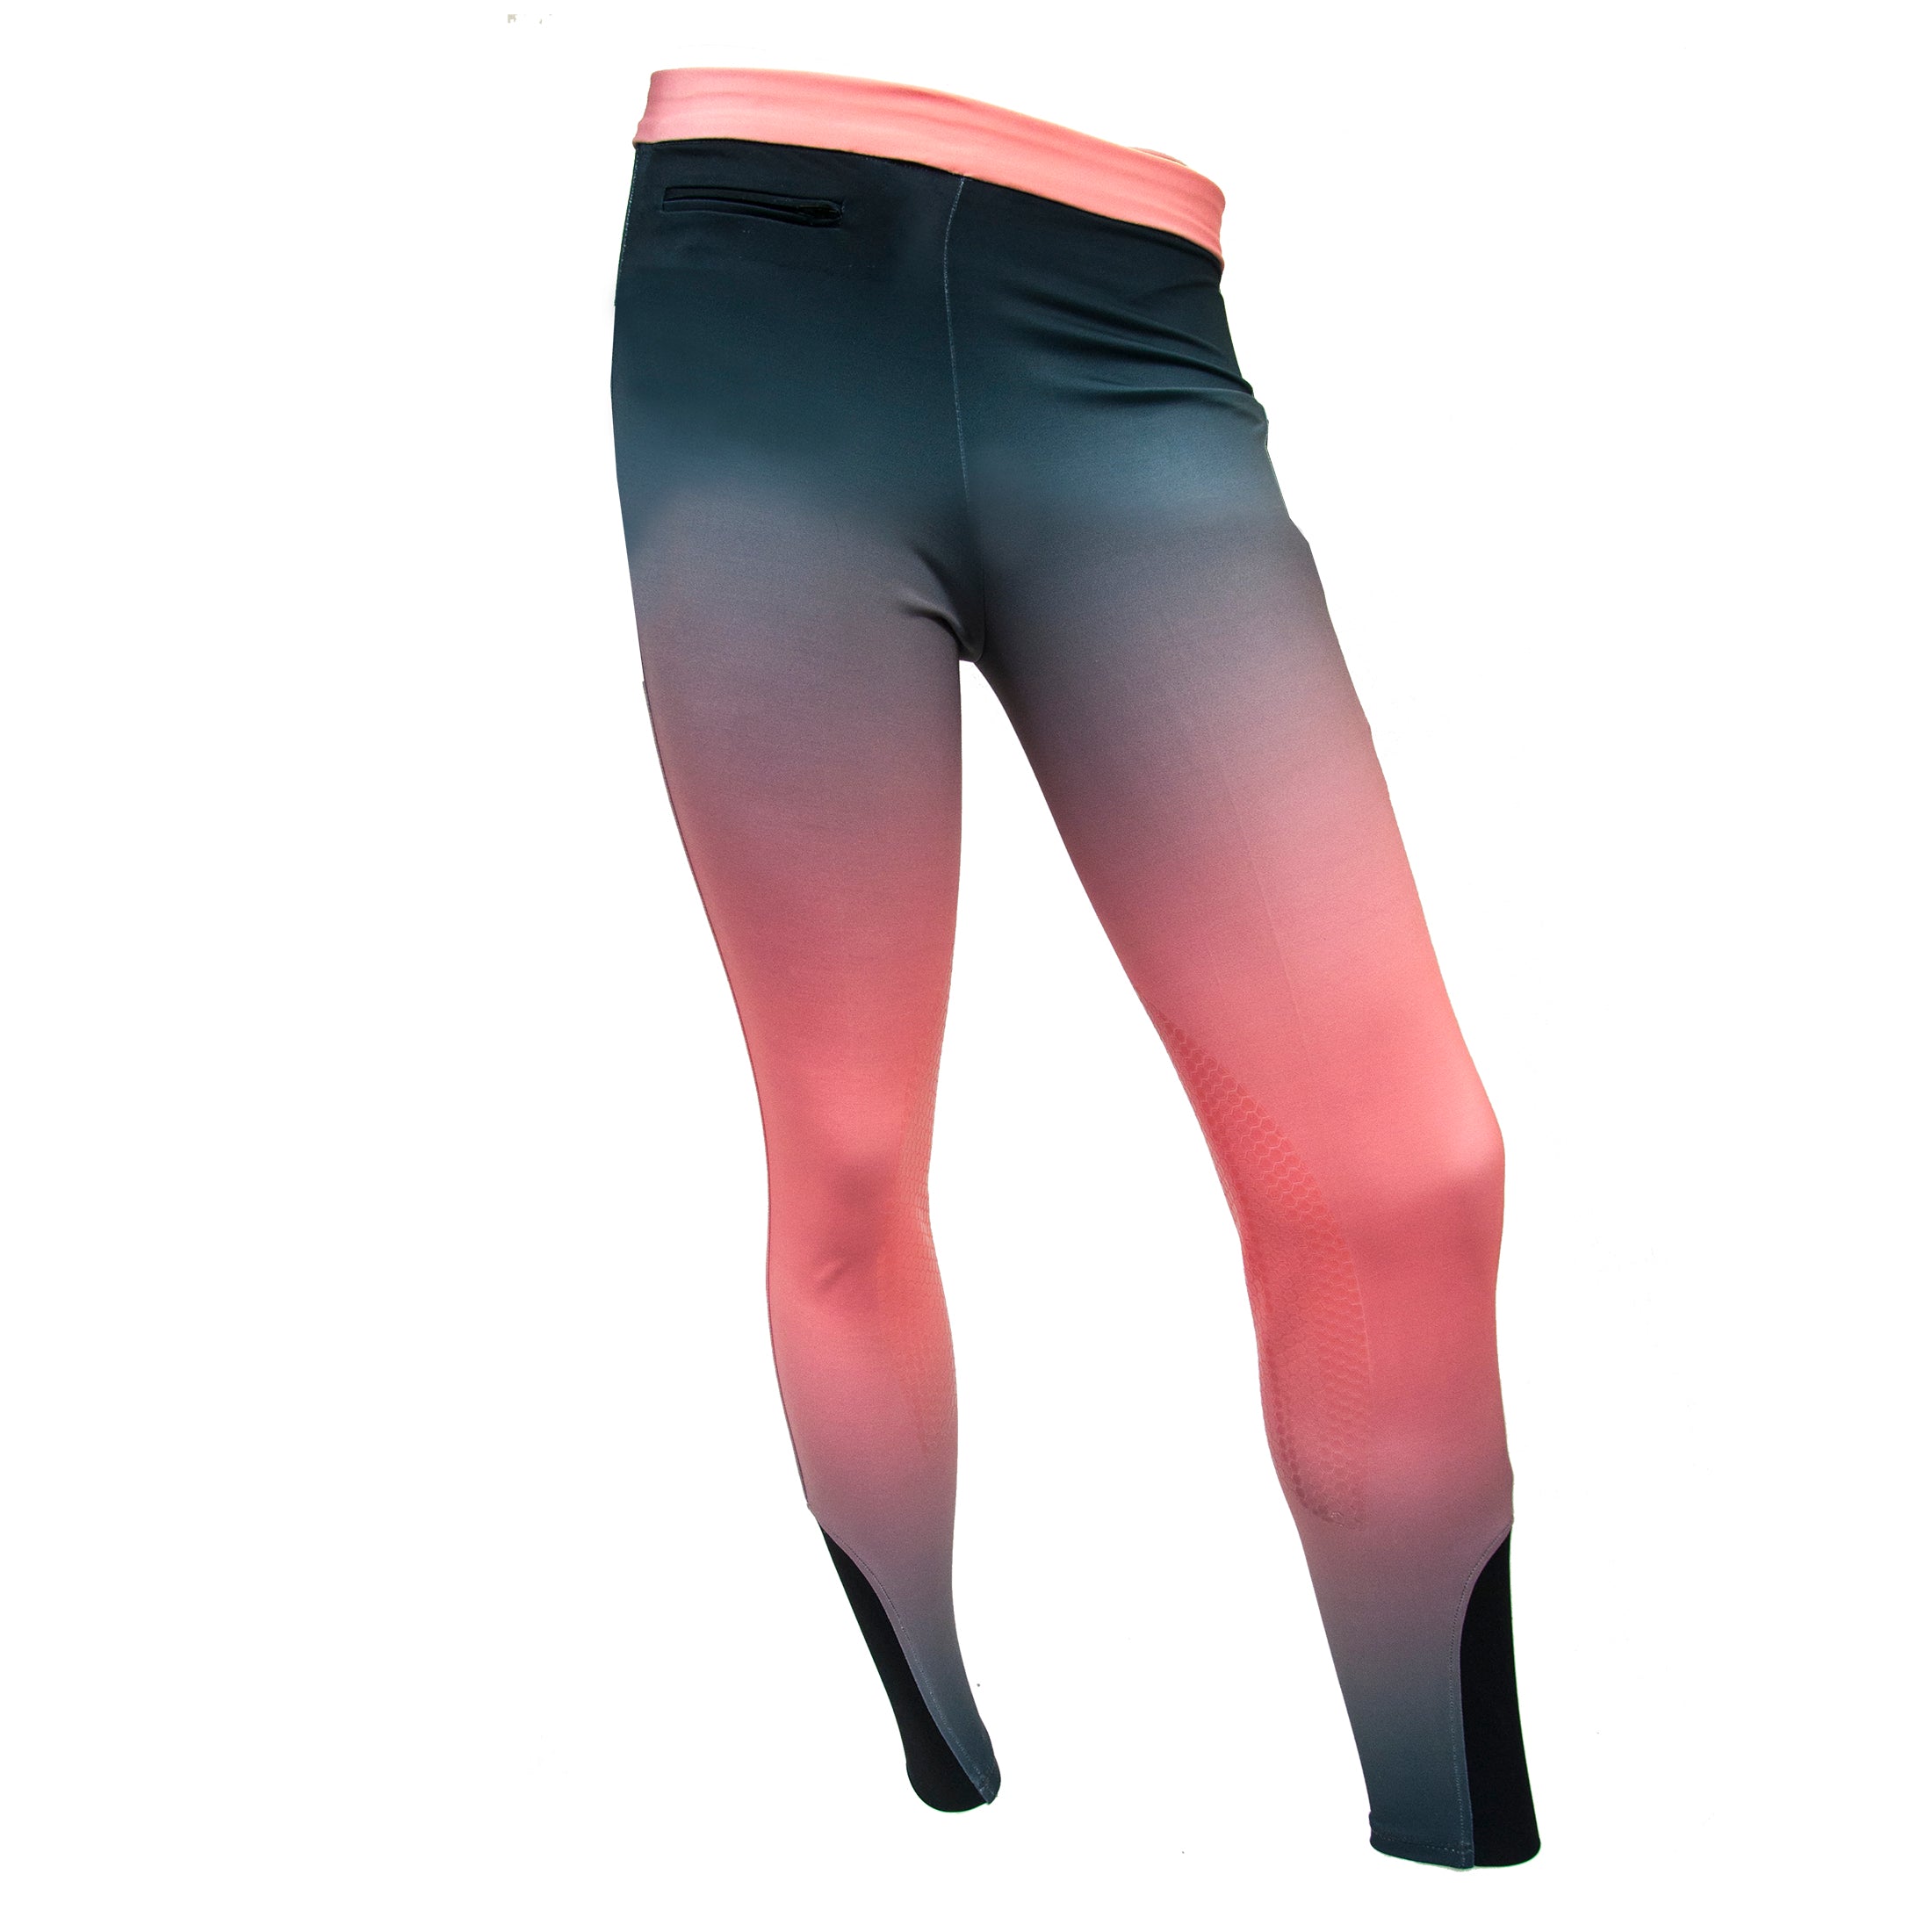 Ridetex Riding Tights with Silicone Knee Patches and Non Slip